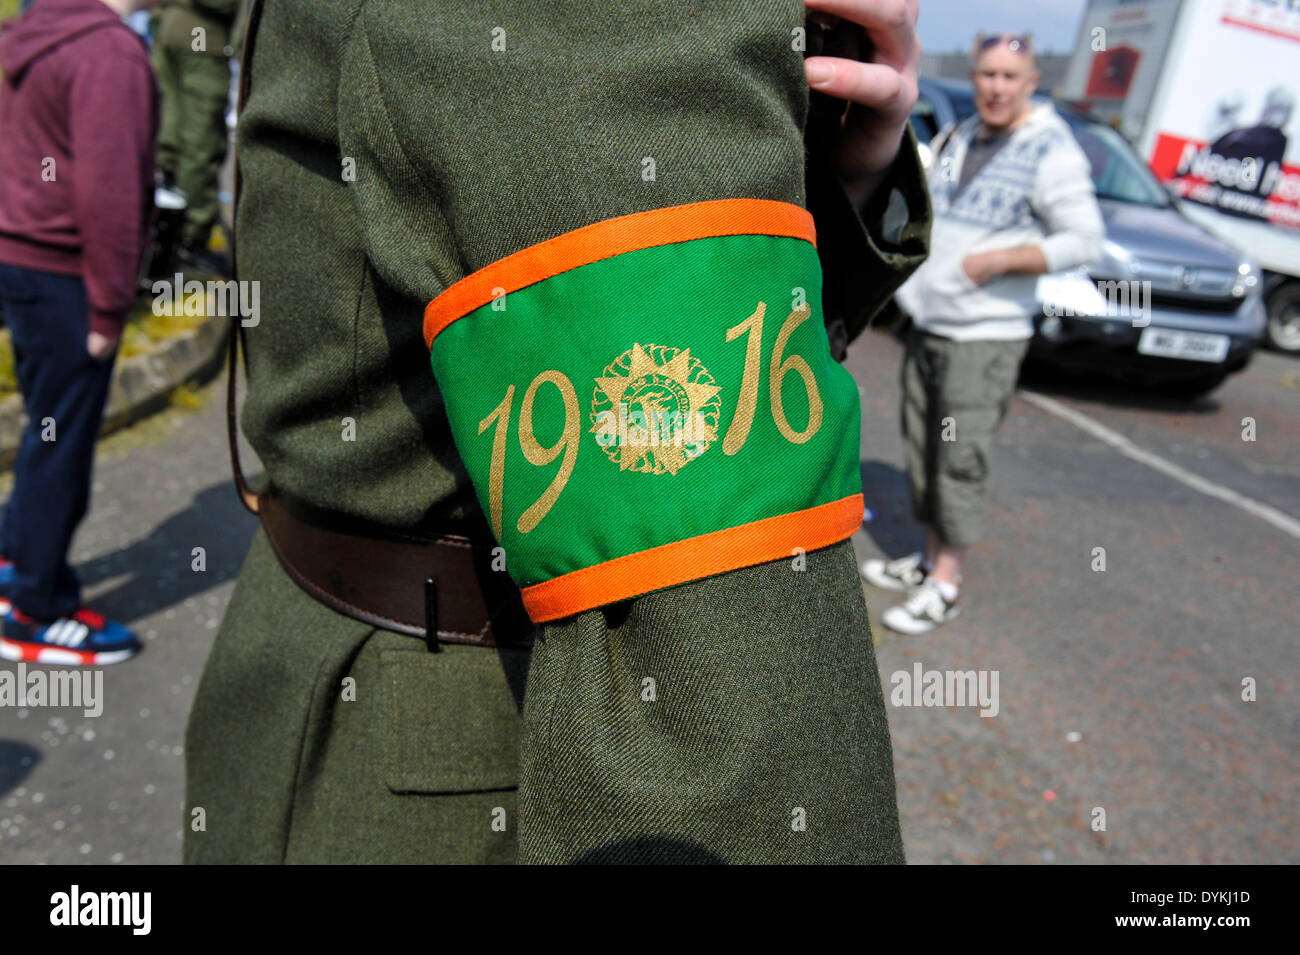 Derry, Londonderry, Northern Ireland. 21st April, 2014. Dissident Republicans Commemorate Easter Rising. A man in paramilitary uniform wearing an arm band to commemorate the 1916 Rising at the Irish republican 32 County Sovereignty Movement parade in the City Cemetery in Derry. Credit: George Sweeney/Alamy Live News Stock Photo